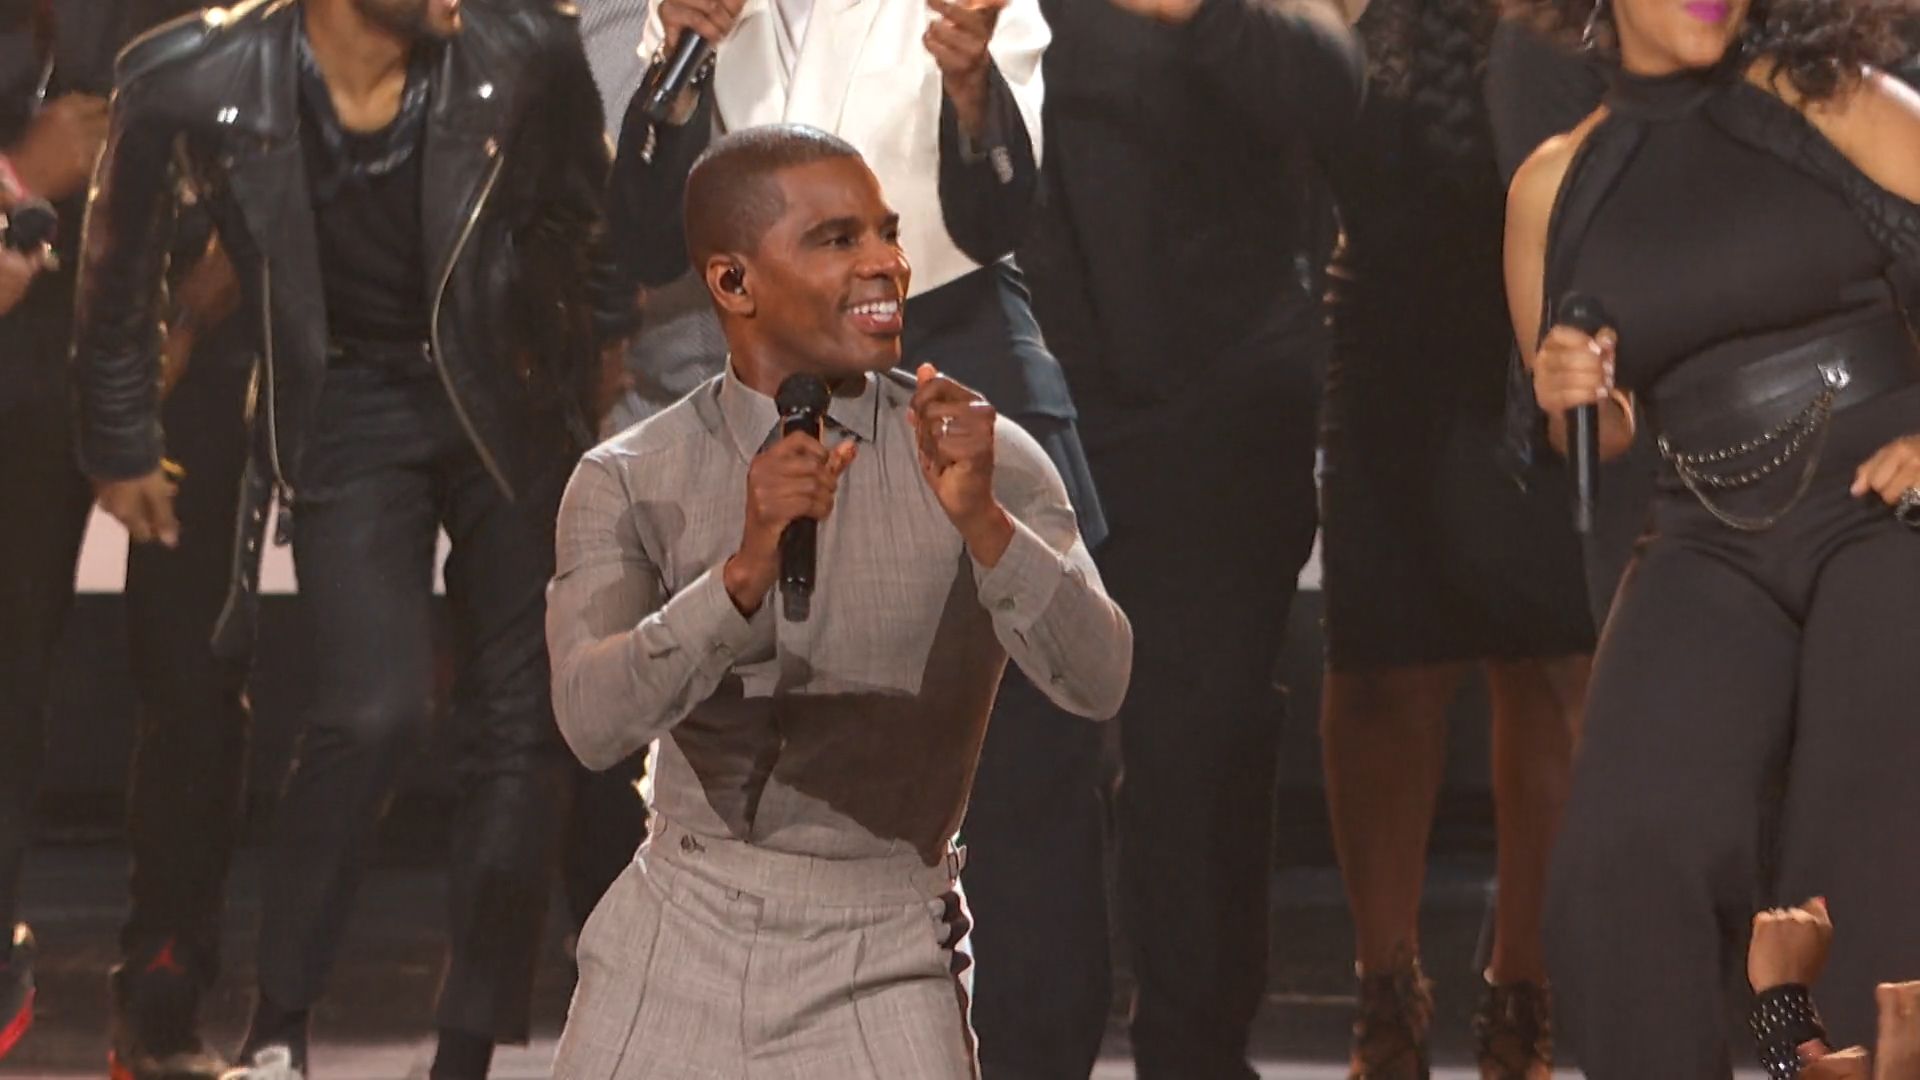 betawards, performance, Kirk Franklin Franklin, Jonathan McReynolds, Erica Campbell and Kelly Price Theory - (Video Clip)